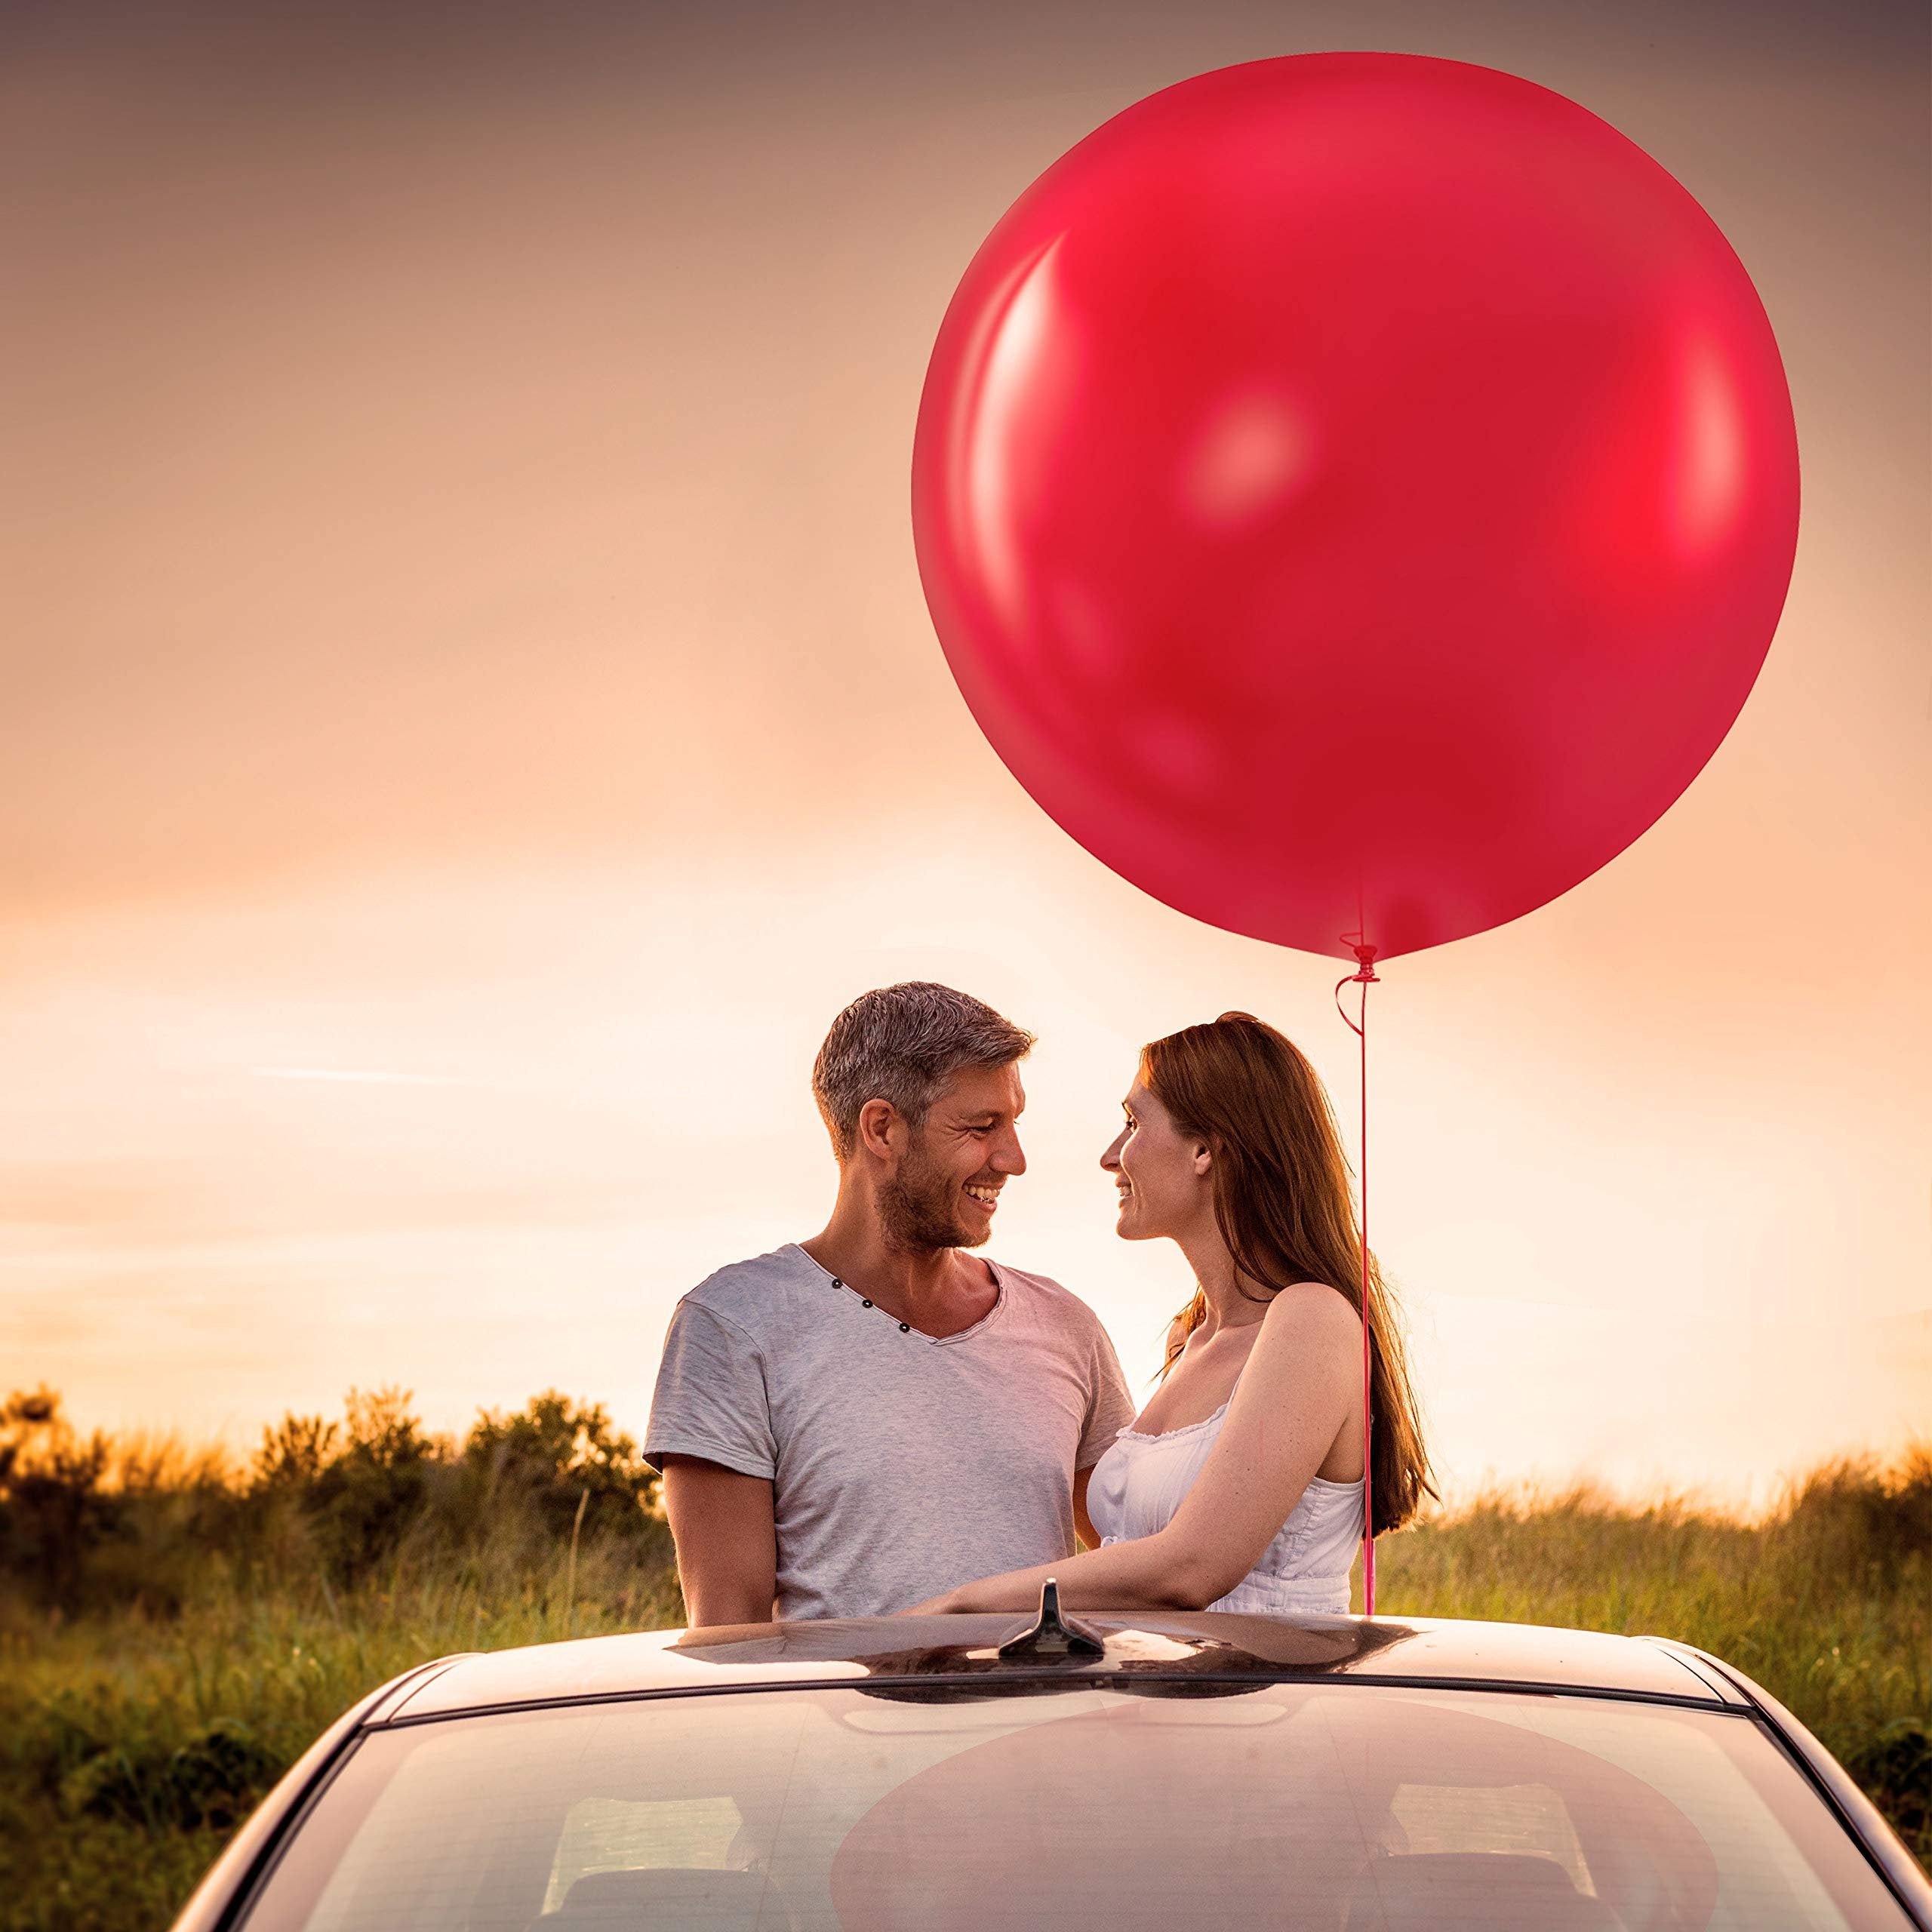 Prextex Red Giant Balloons - 8 Jumbo 36 Inch Red Balloons for Photo Shoot, Wedding, Baby Shower, Birthday Party and Event Decoration - Strong Latex Big Round Balloons - Helium Quality